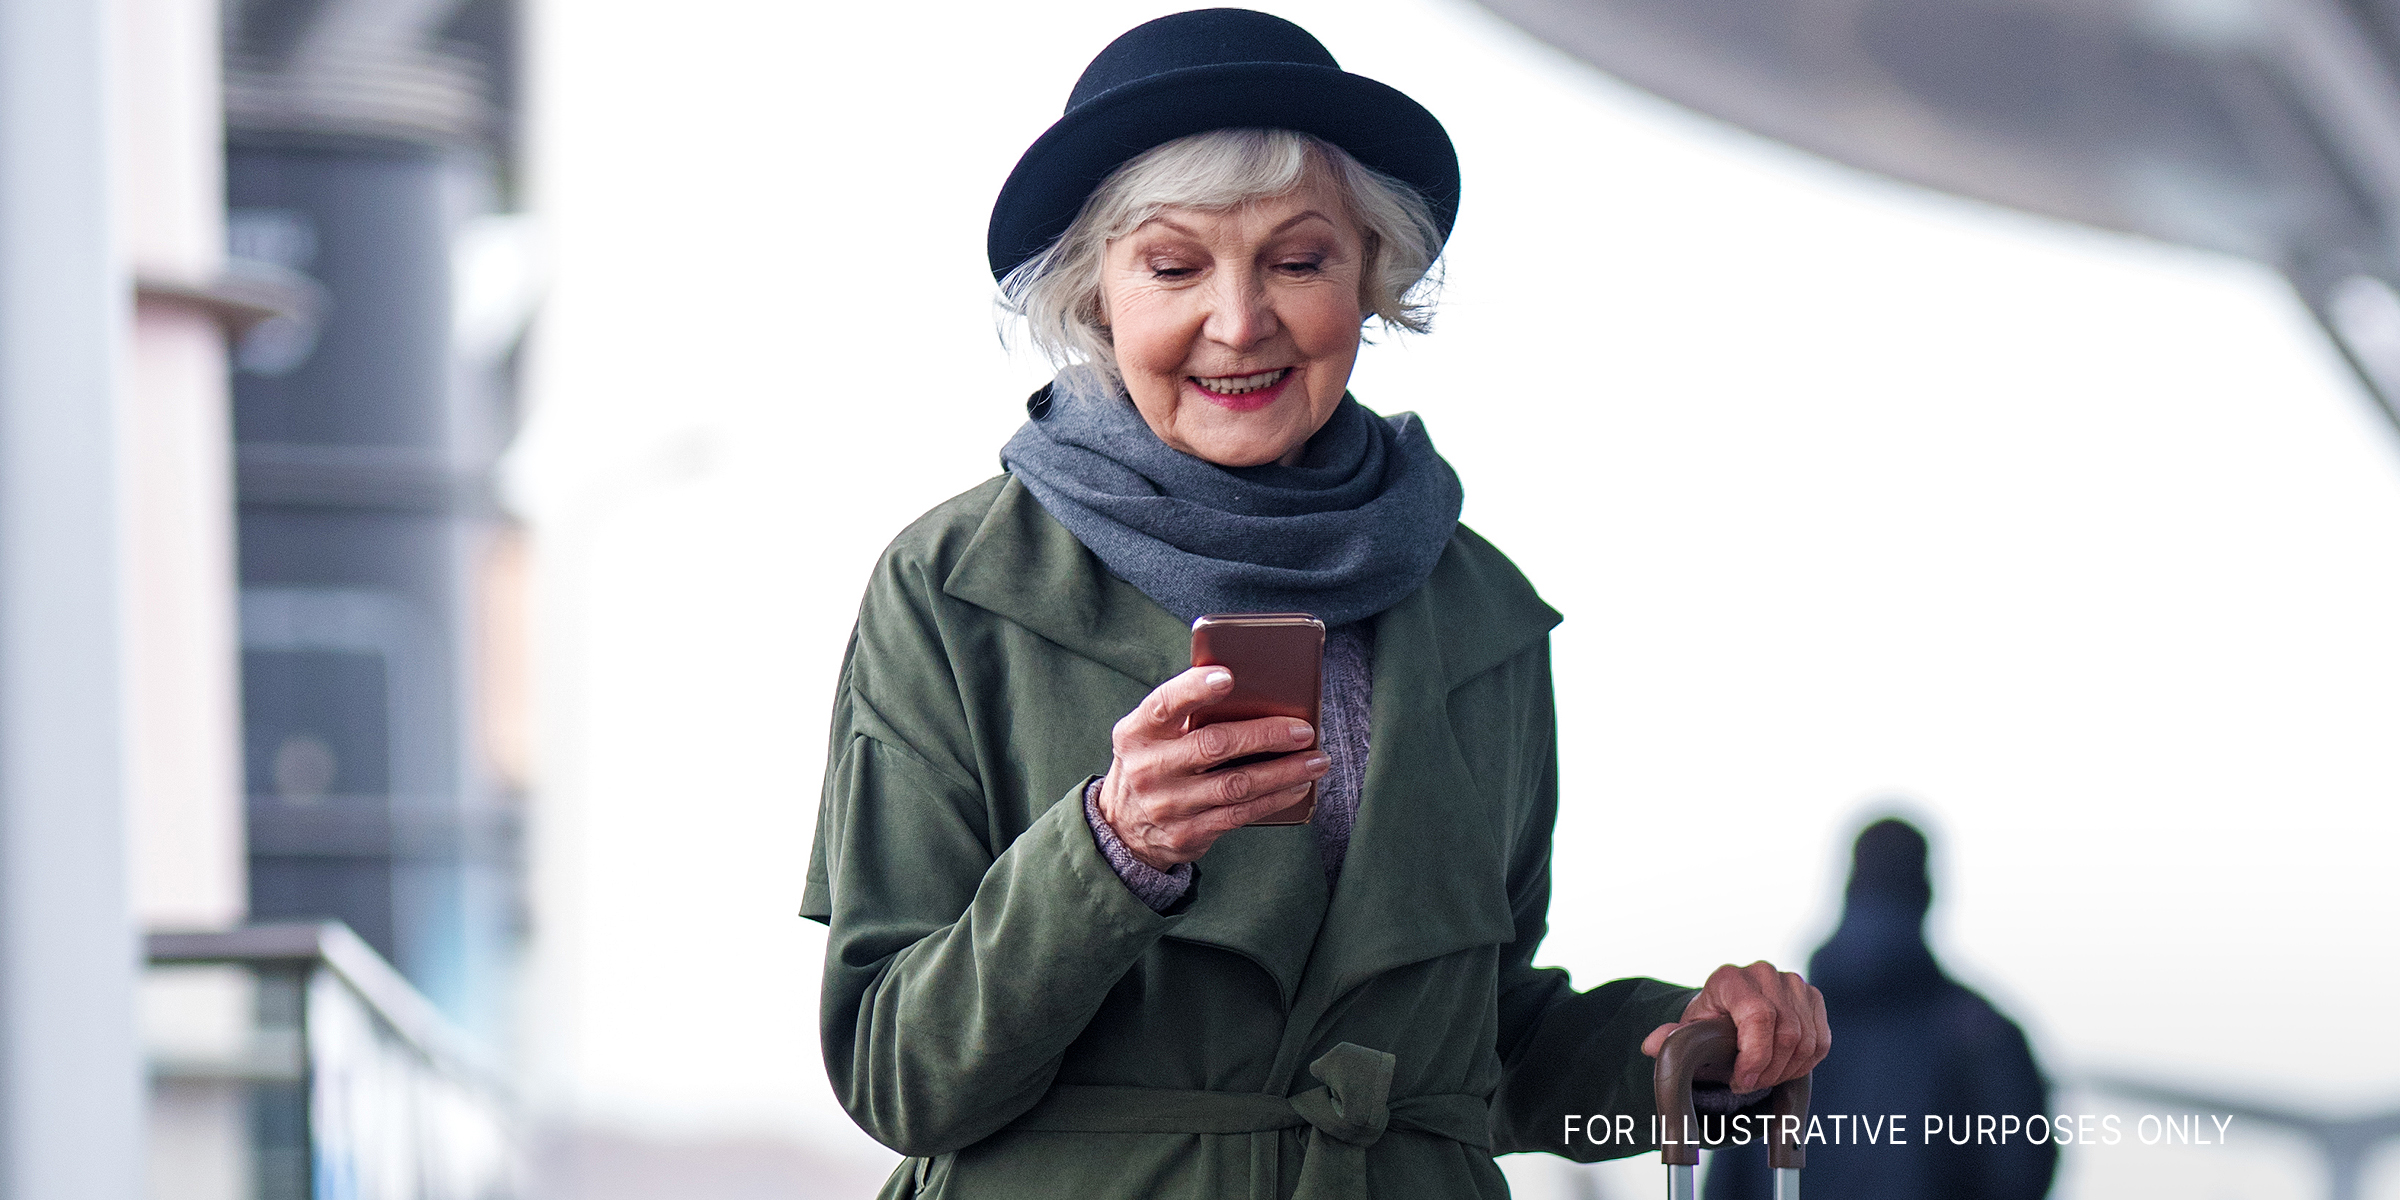 Senior woman on her phone at the airport | Source: Shutterstock